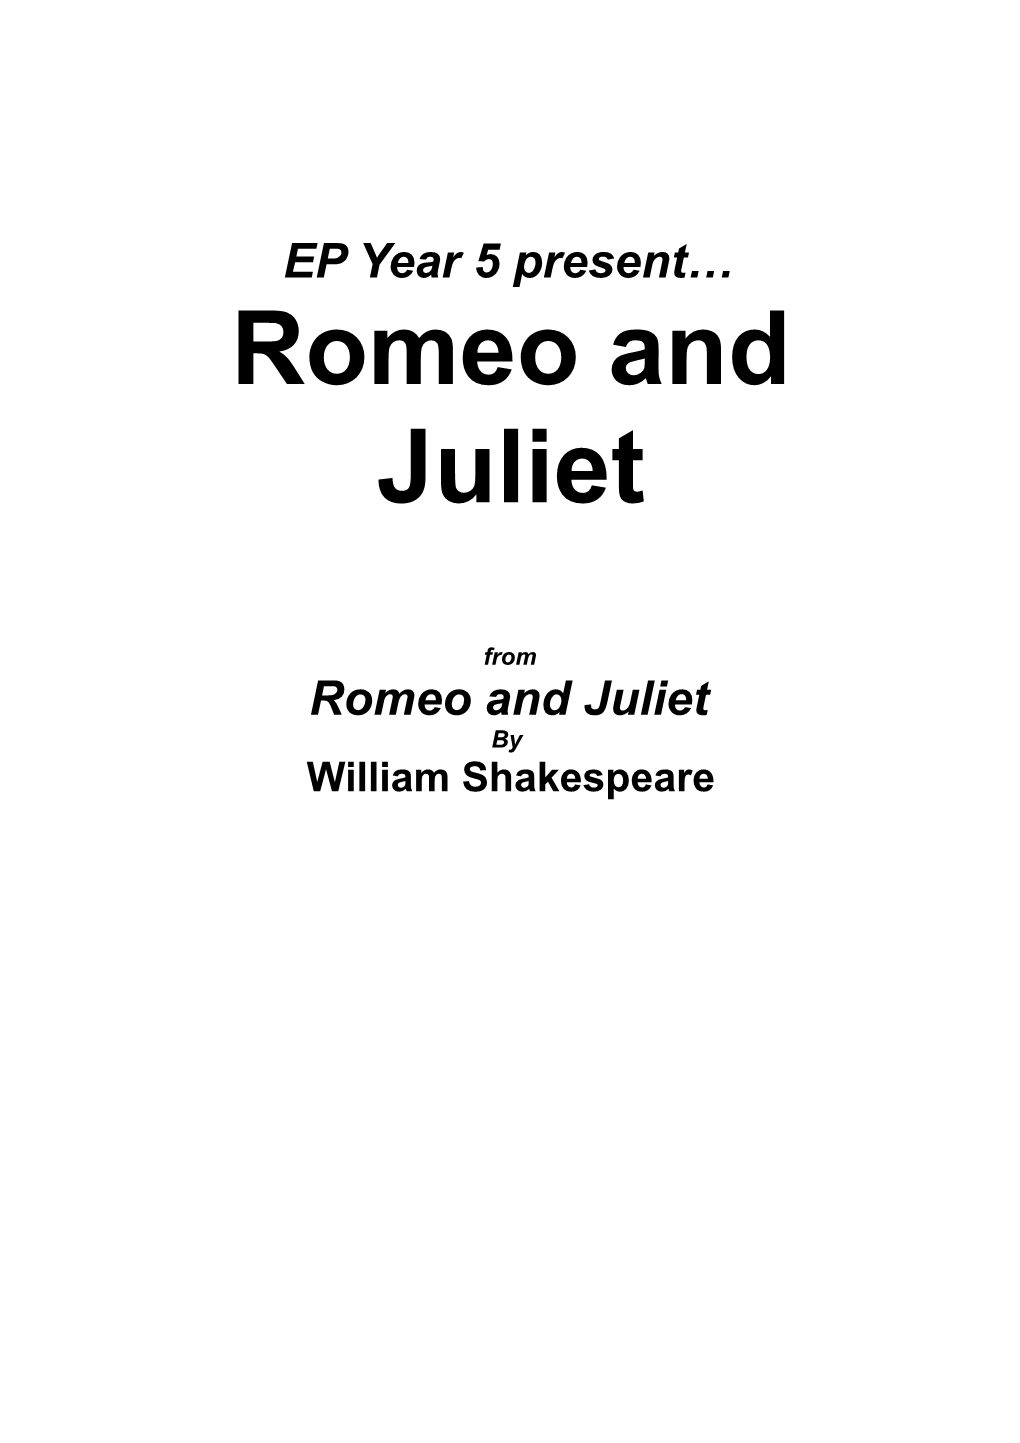 A Thirty-Minute Romeo and Juliet